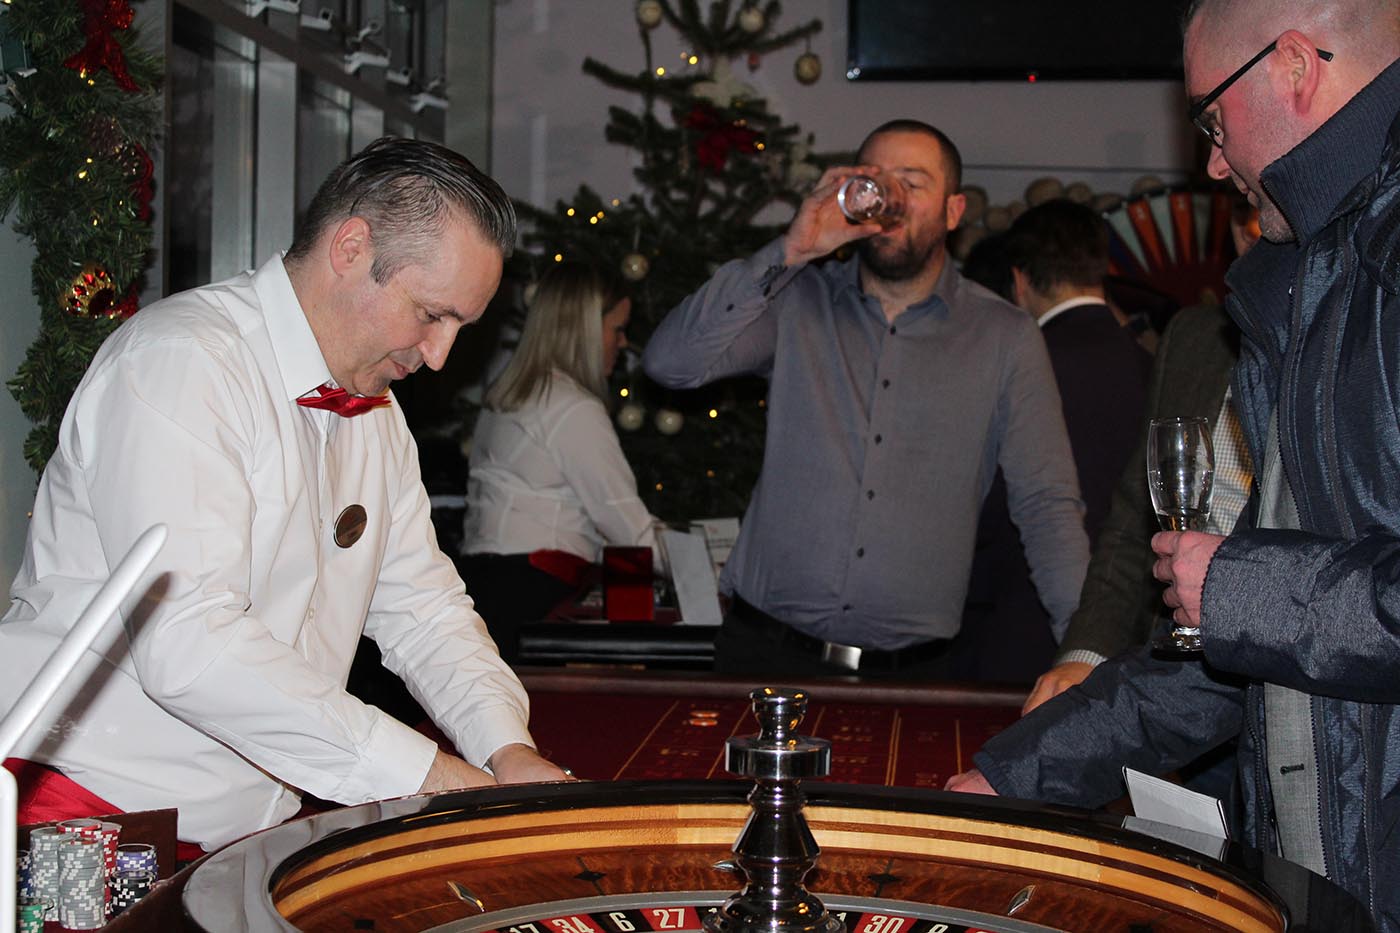 Croupier dealing roulette at a corporate Christmas party